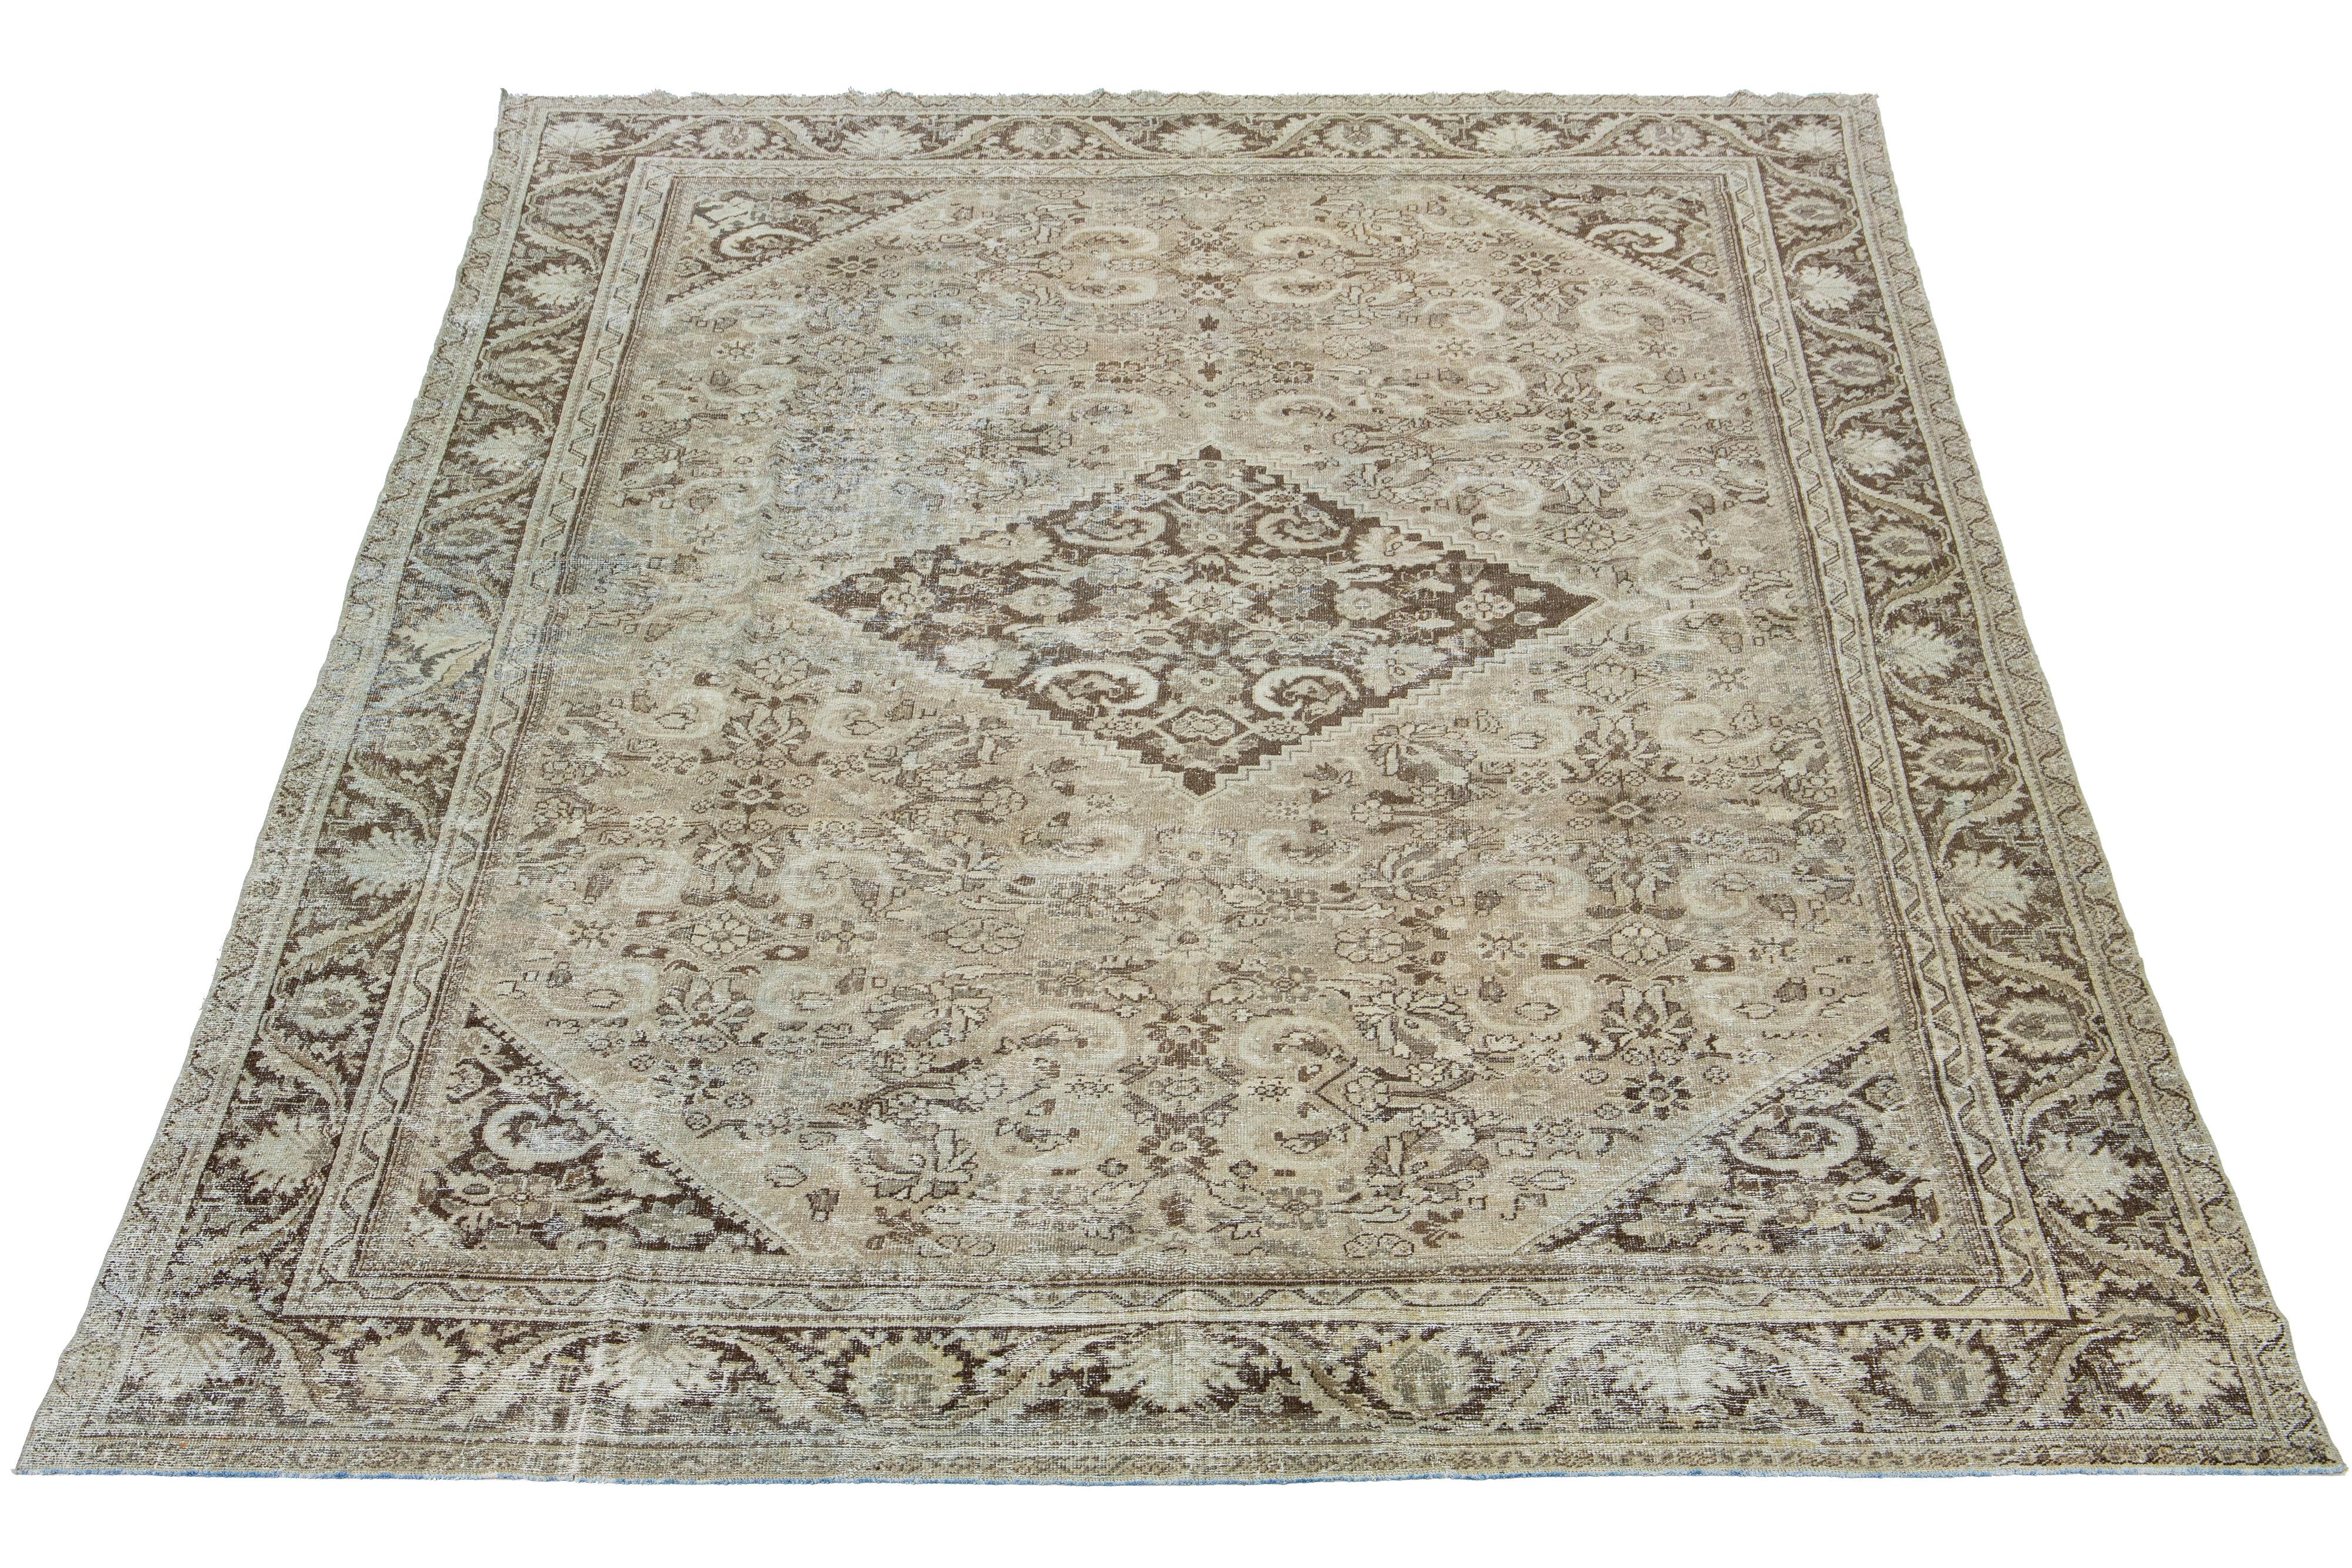 Beautiful Antique Distressed Mahal hand-knotted wool rug with a light brown color field. This Persian rug has classic blue and beige hues throughout the medallion floral motif.

This rug measures 10'3' X 14'8